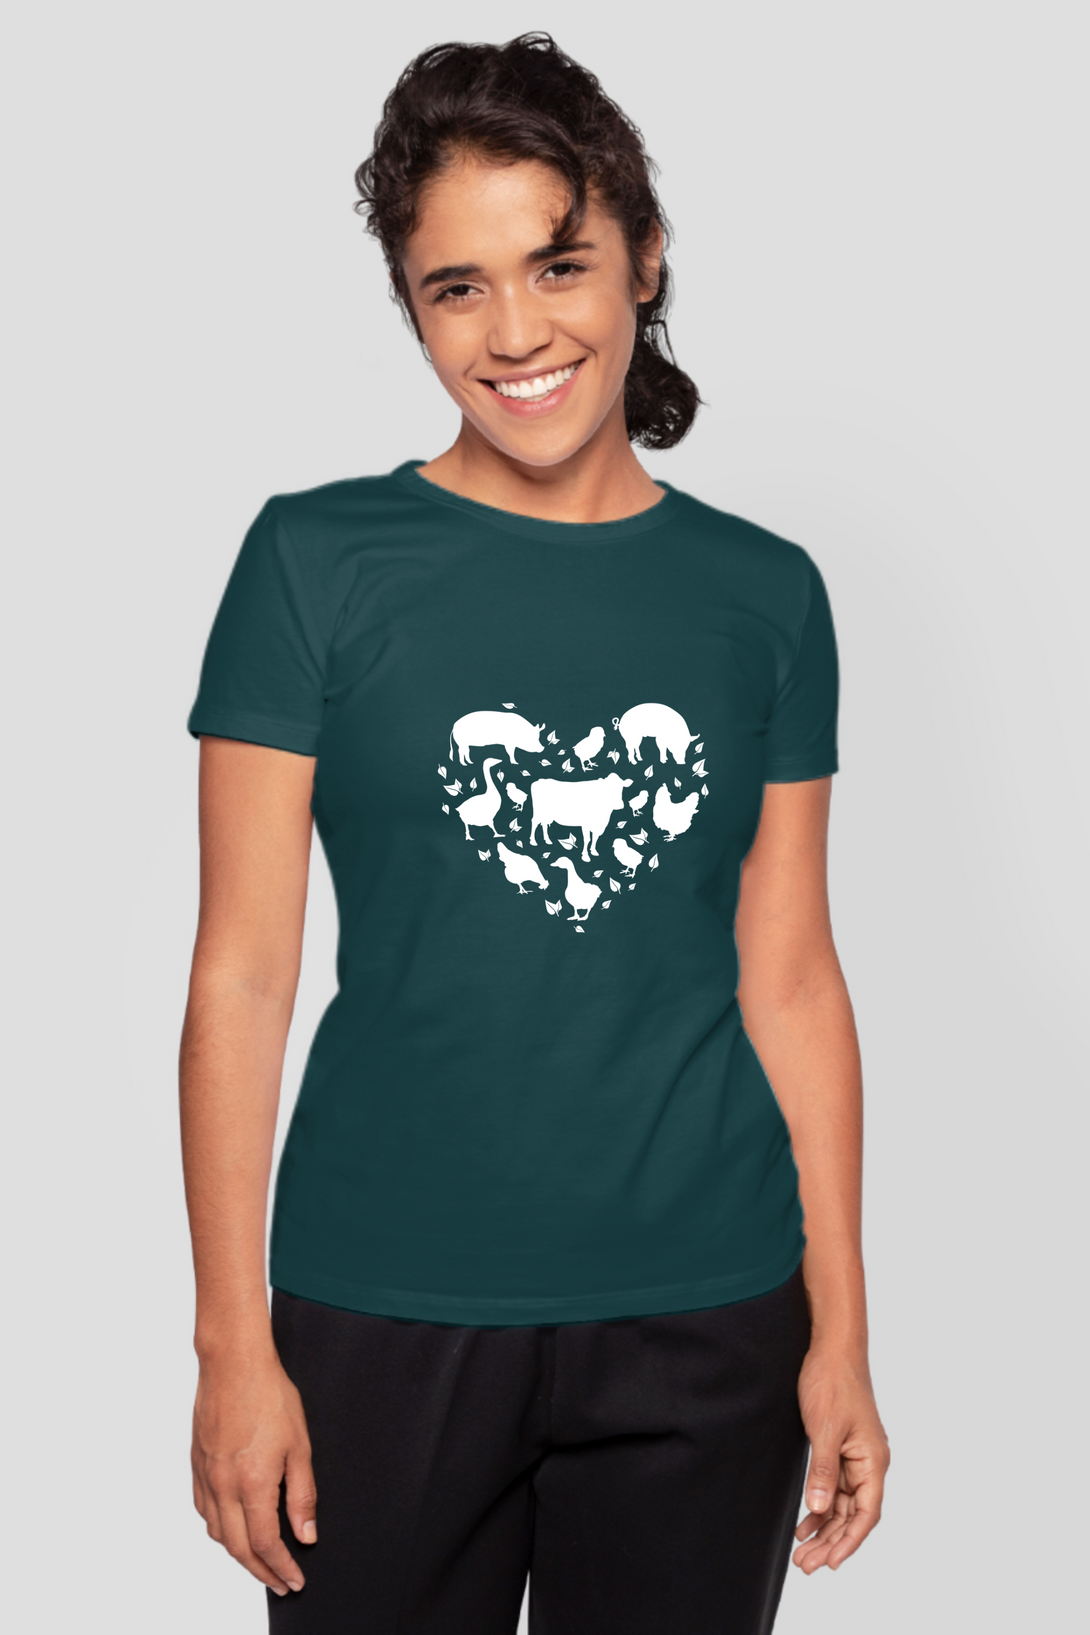 Farm Animals In My Heart Printed T-Shirt For Women - WowWaves - 8